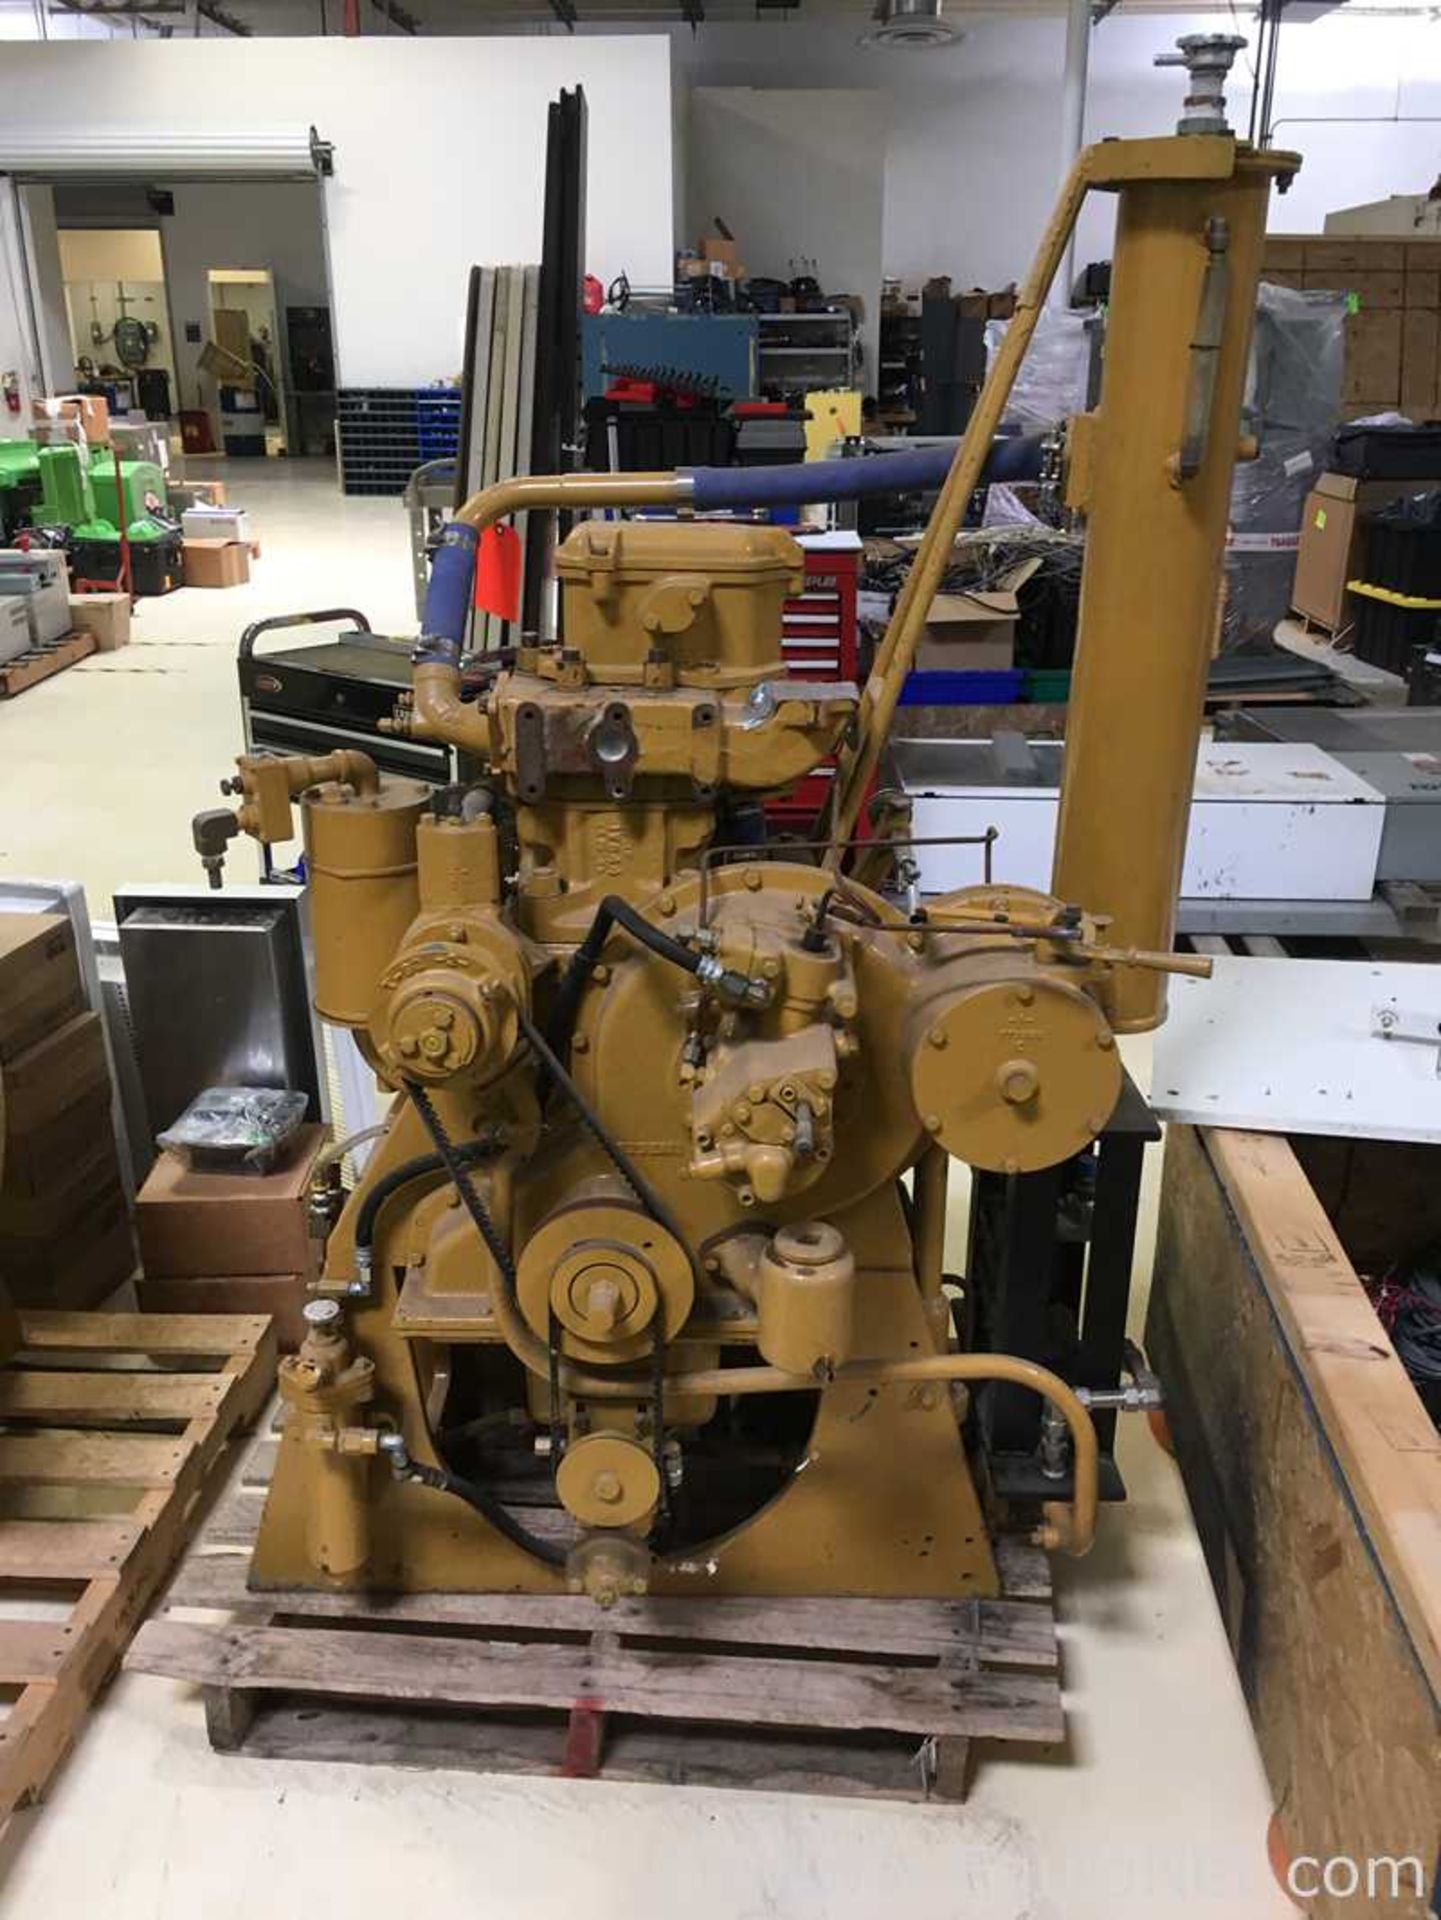 Caterpillar 1Y540 Single Cylinder Direct Injection Diesel Engine - Image 6 of 6